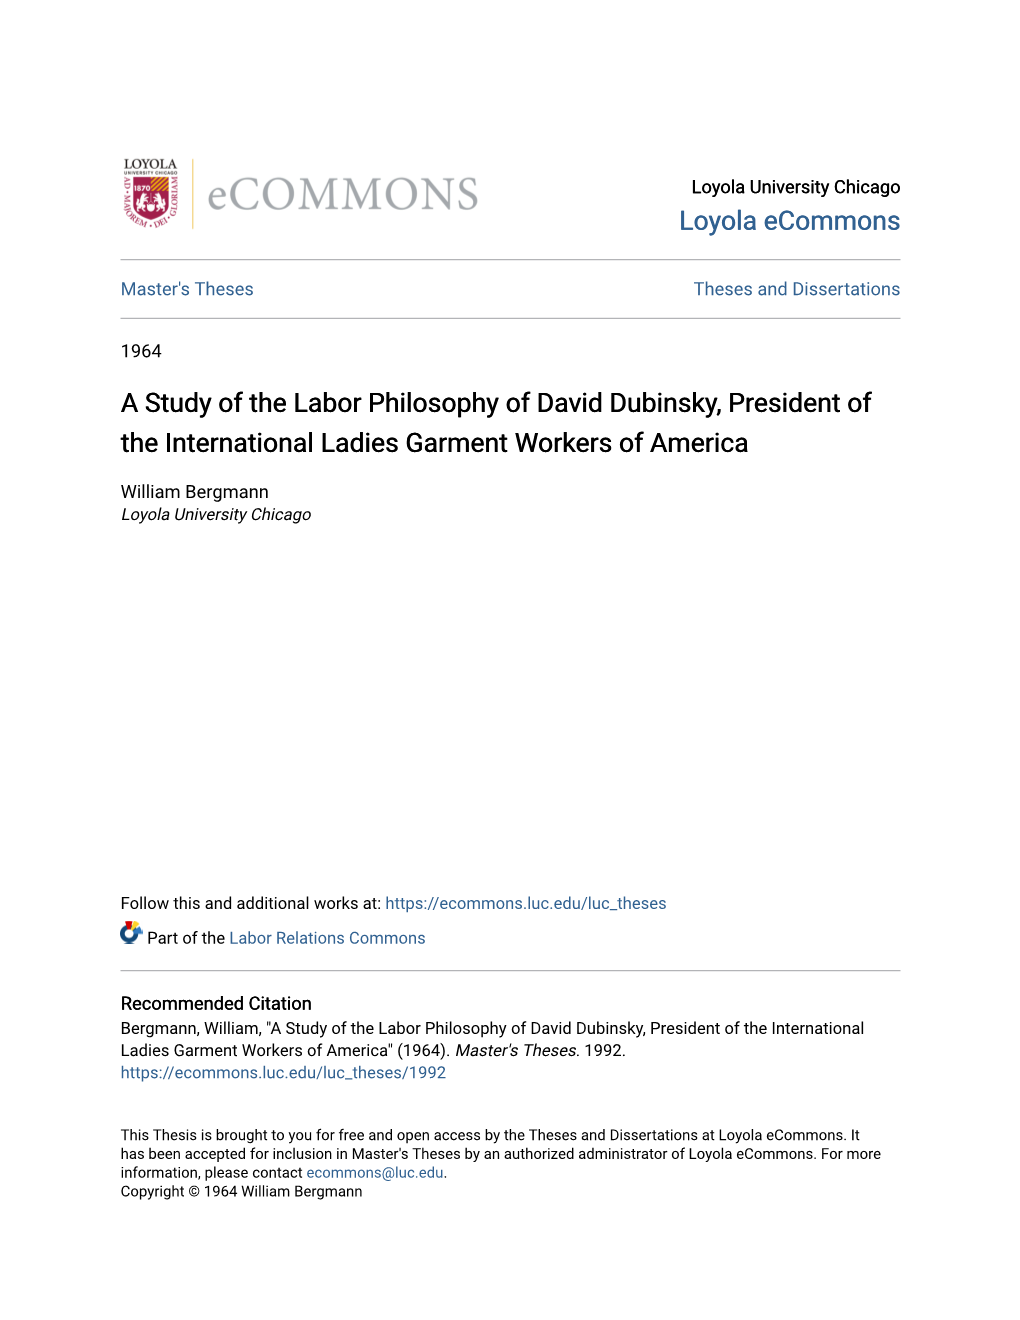 A Study of the Labor Philosophy of David Dubinsky, President of the International Ladies Garment Workers of America